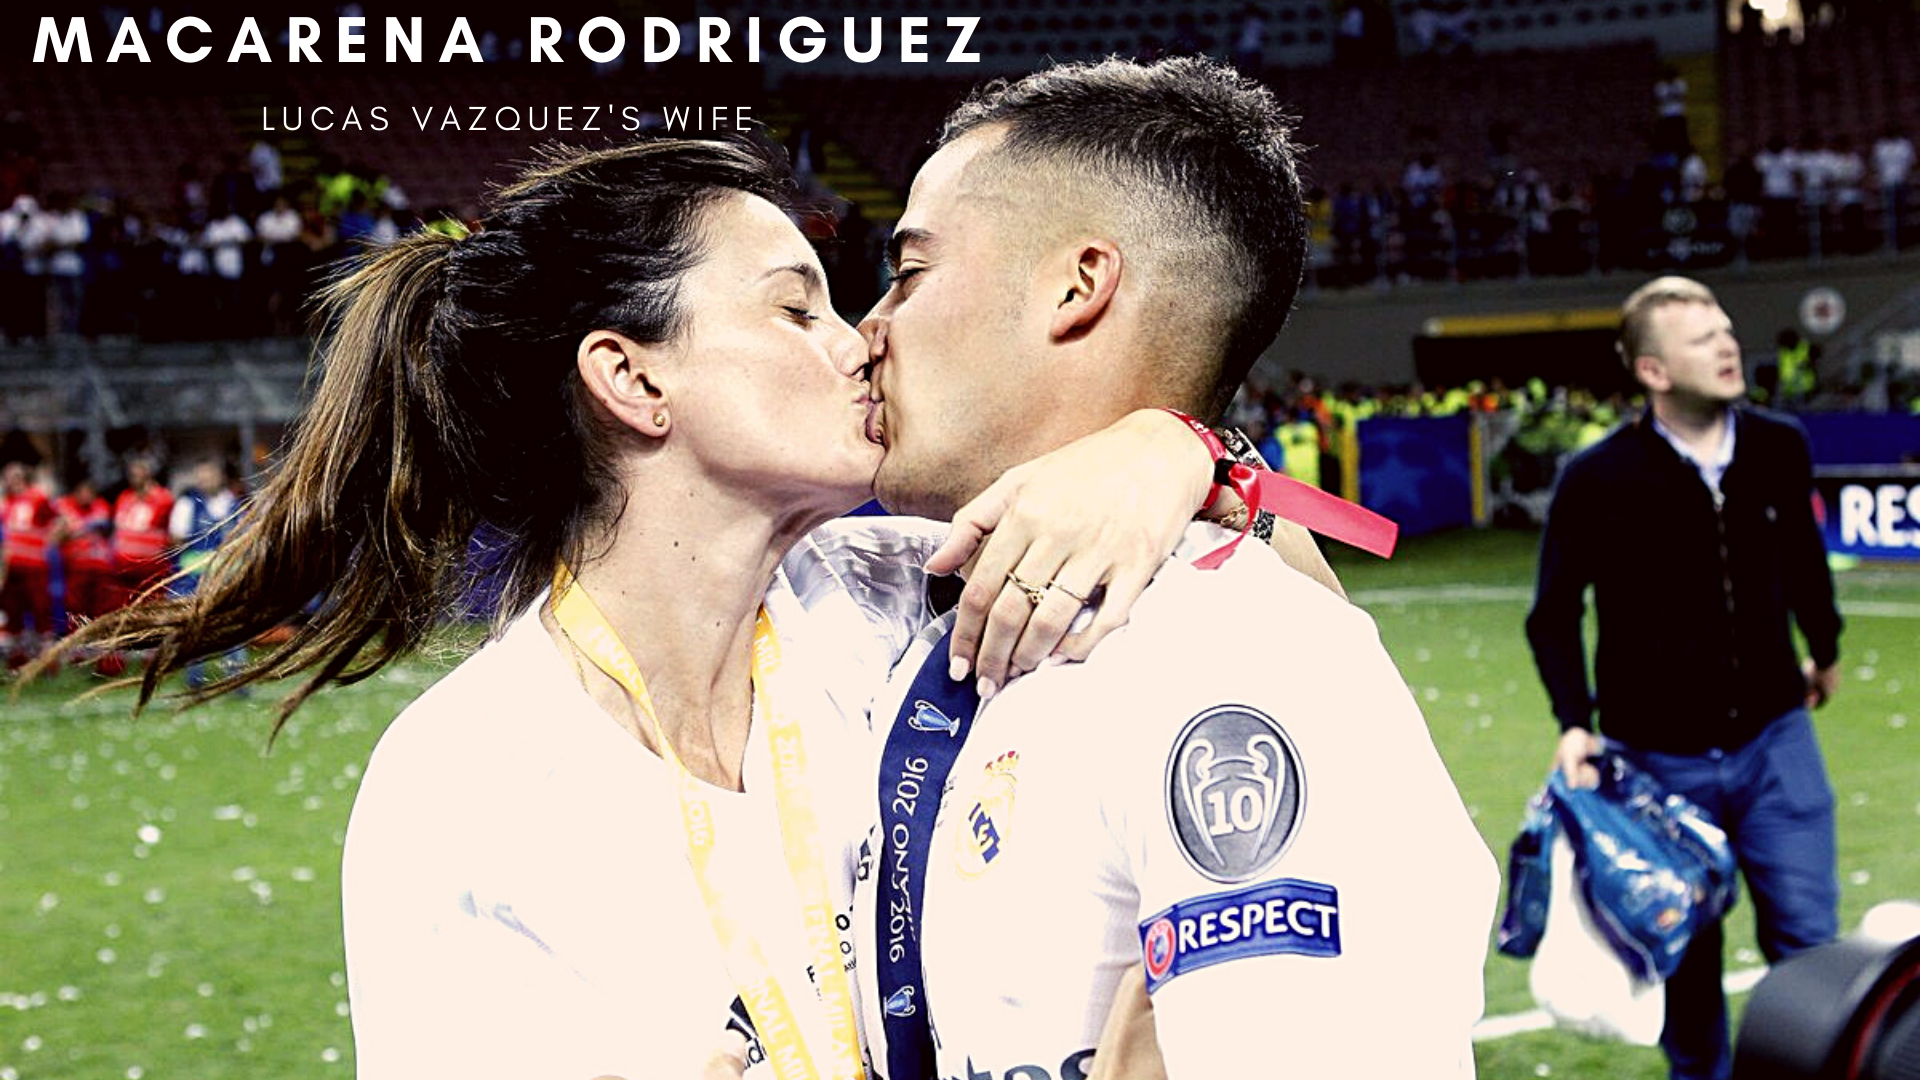 Lucas Vazquez with wife Macarena Rodriguez. (Credit: Real Madrid)